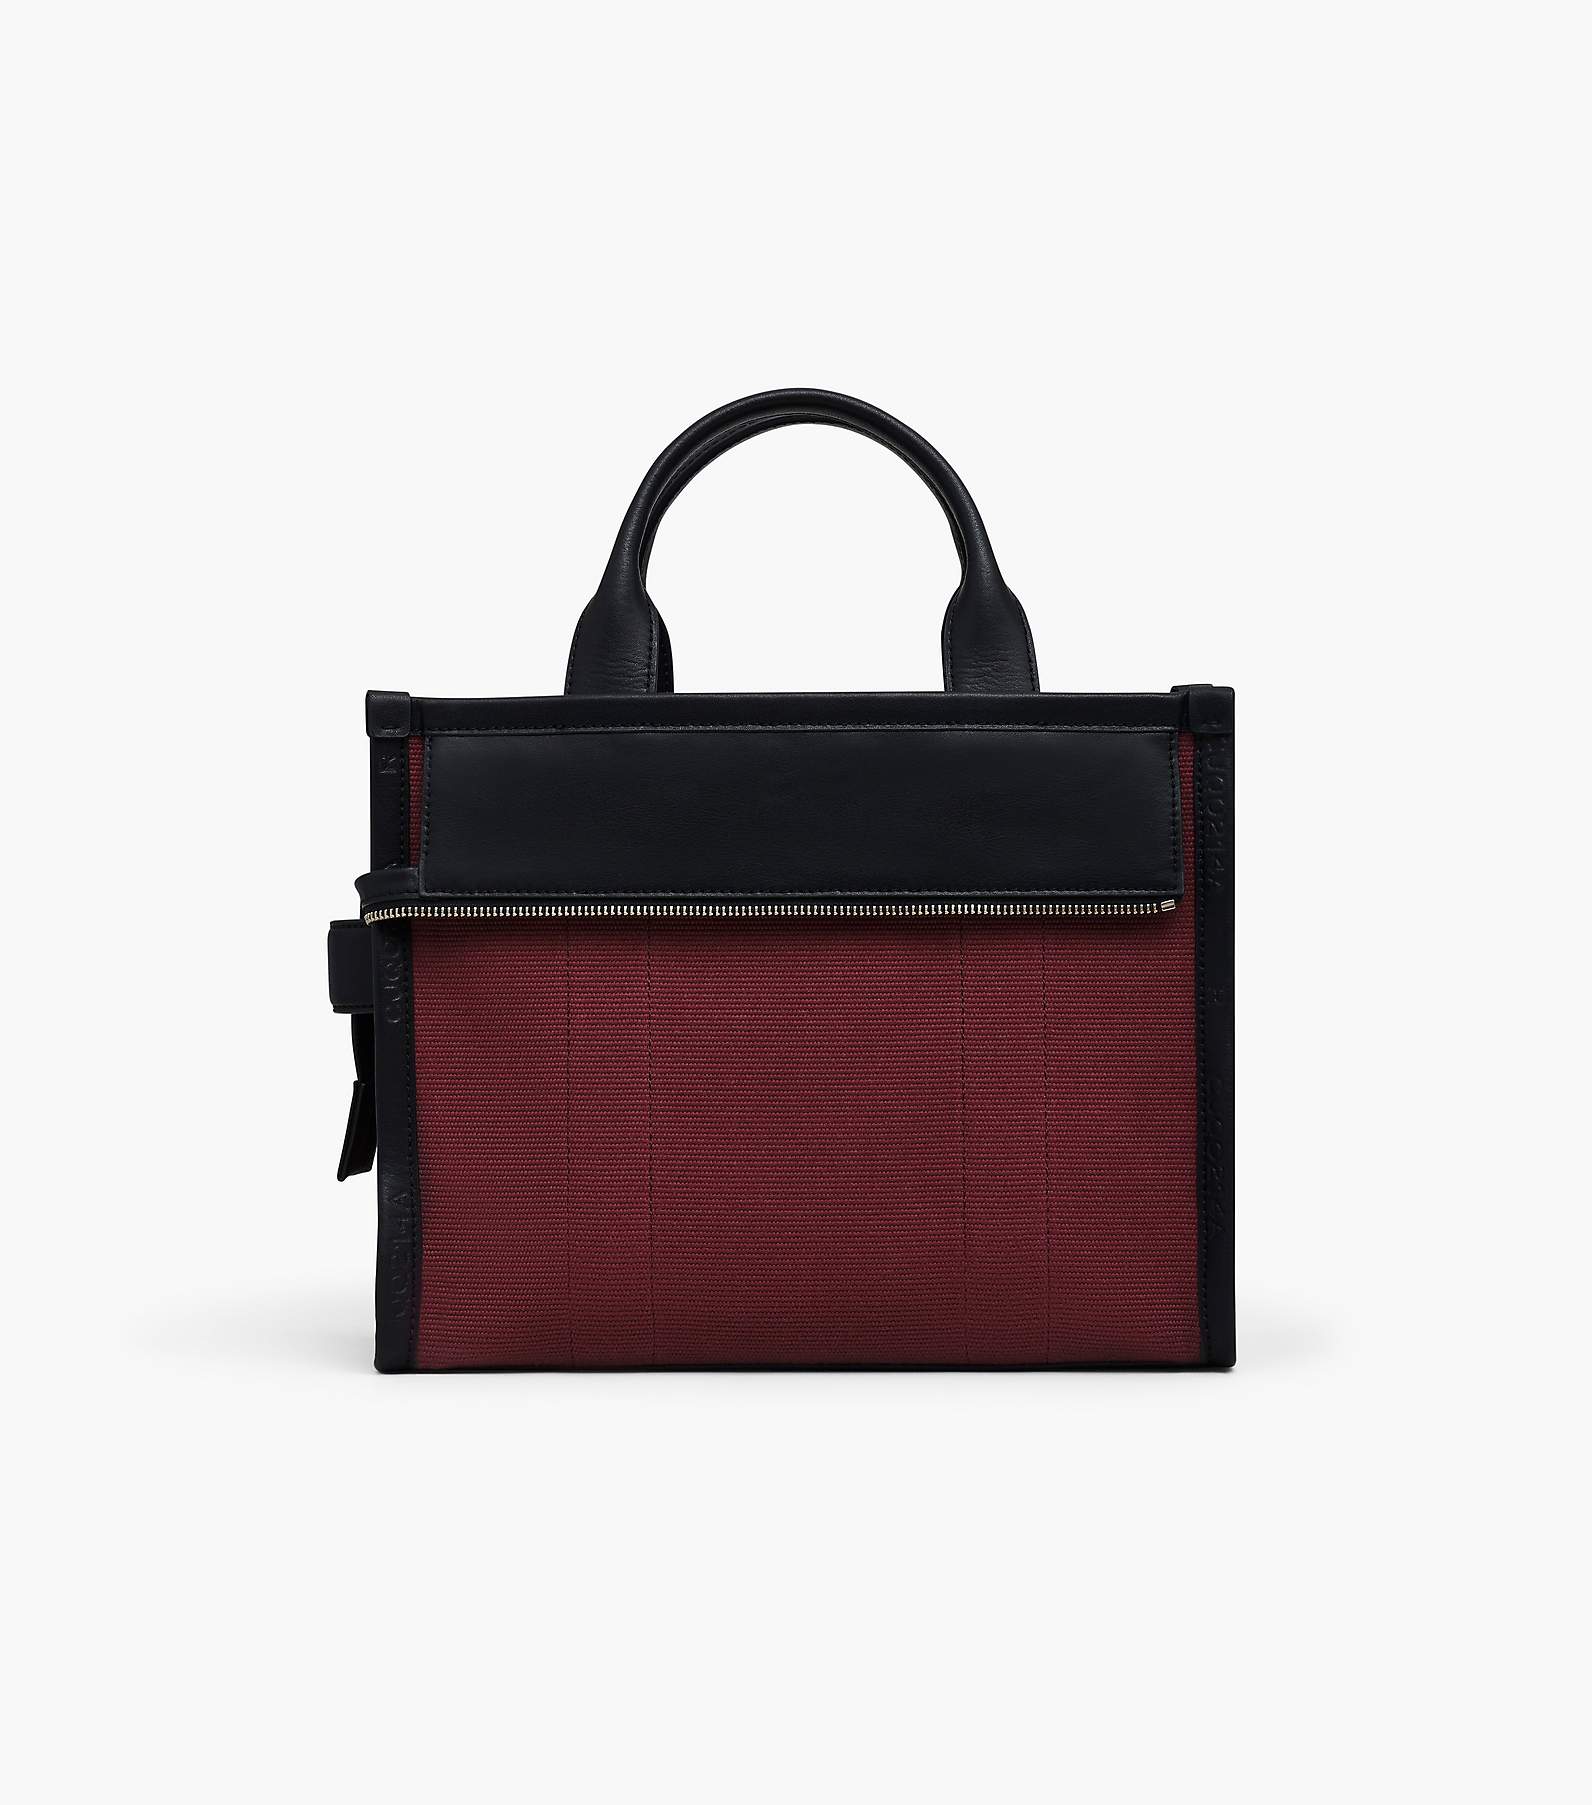 The Inside-Out Jacquard Medium Tote Bag, Marc Jacobs